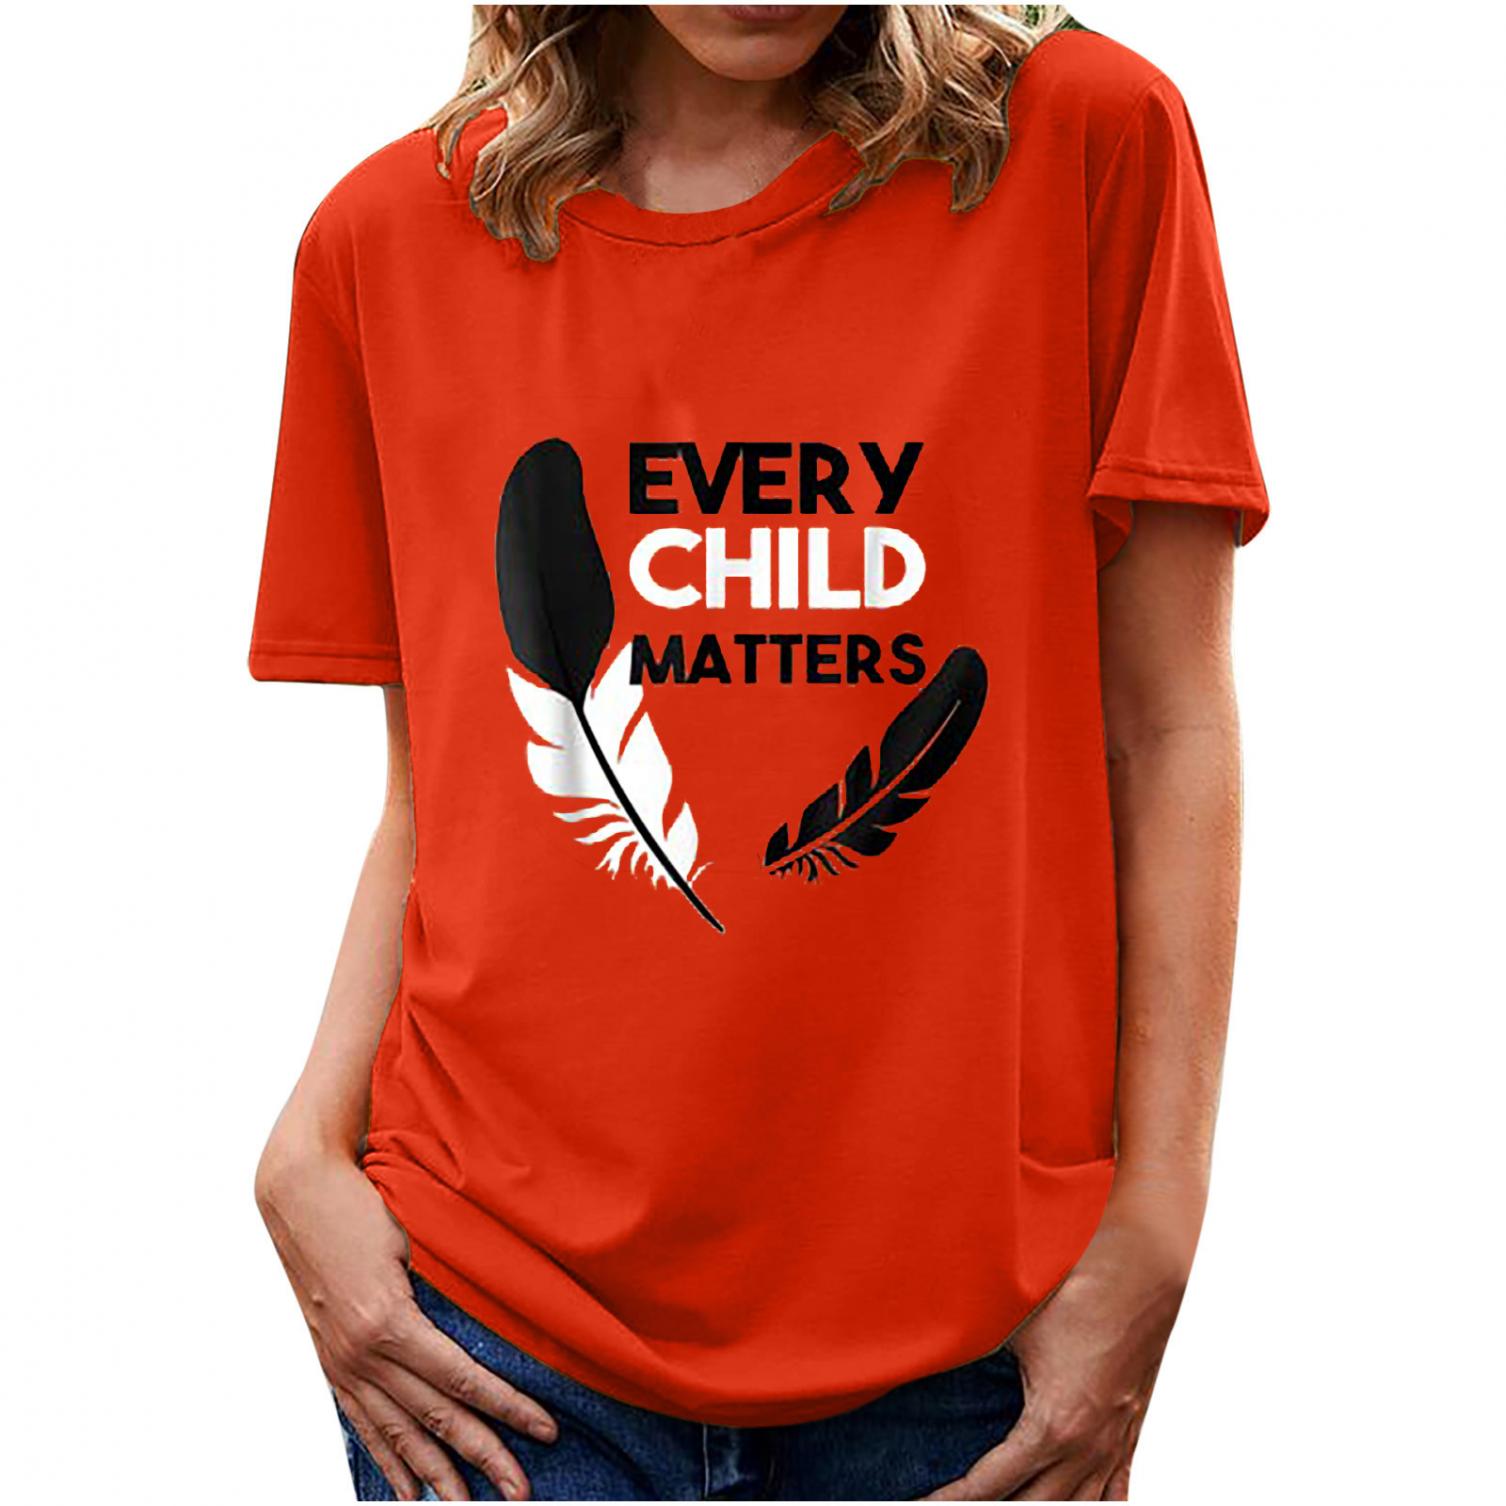 Every Child Matters Print Crewneck T-Shirts Casual Loose Fit Short Sleeve Comfy Tunic Blouse Women Summer Orange Tops 